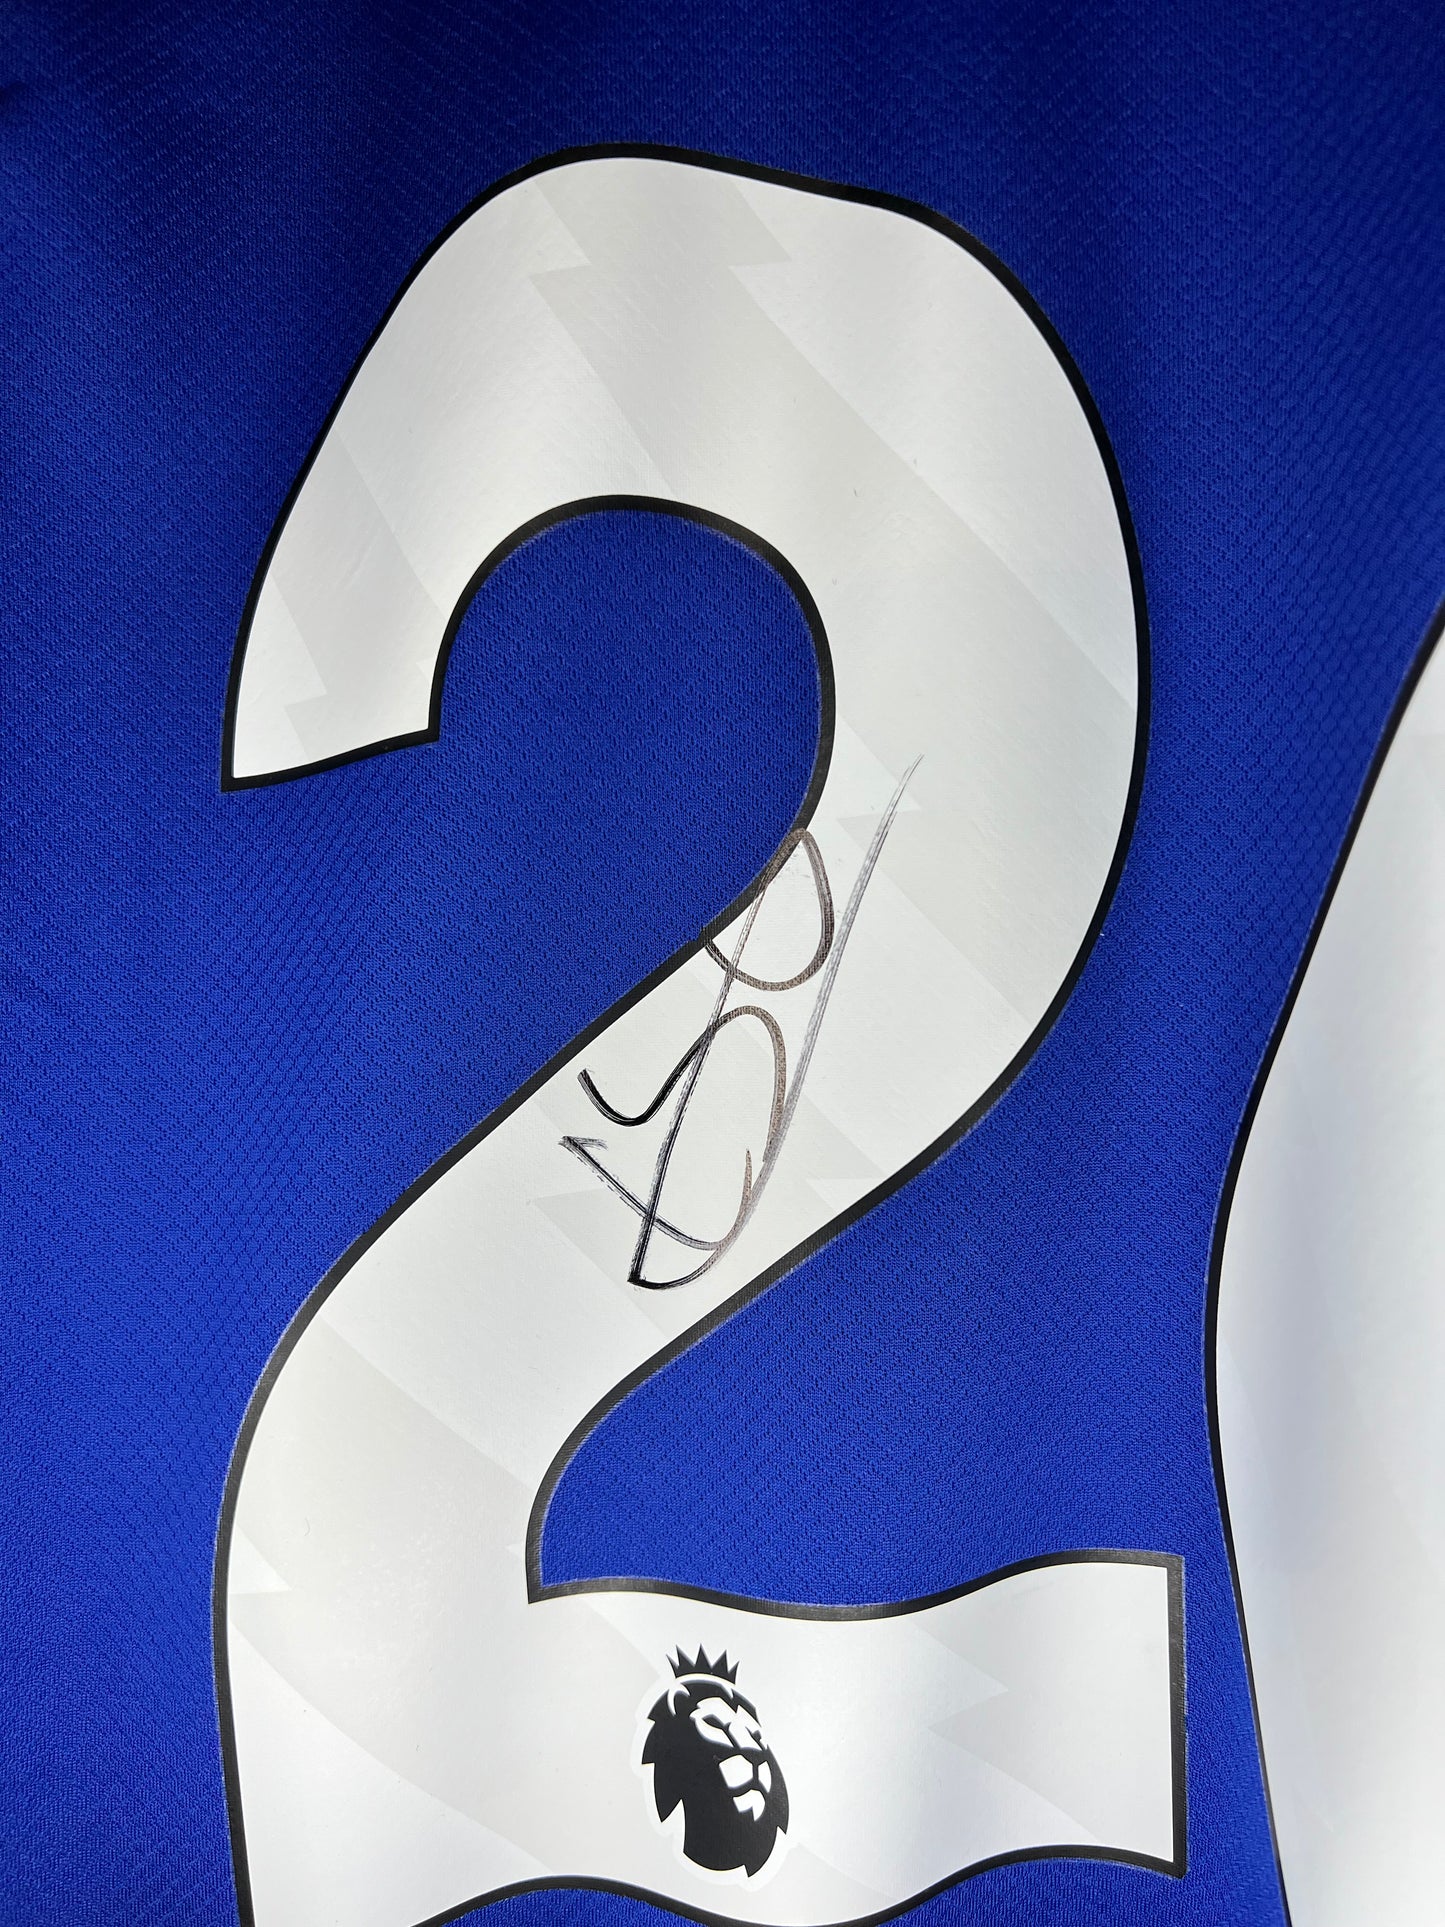 Colwill signed Chelsea shirt